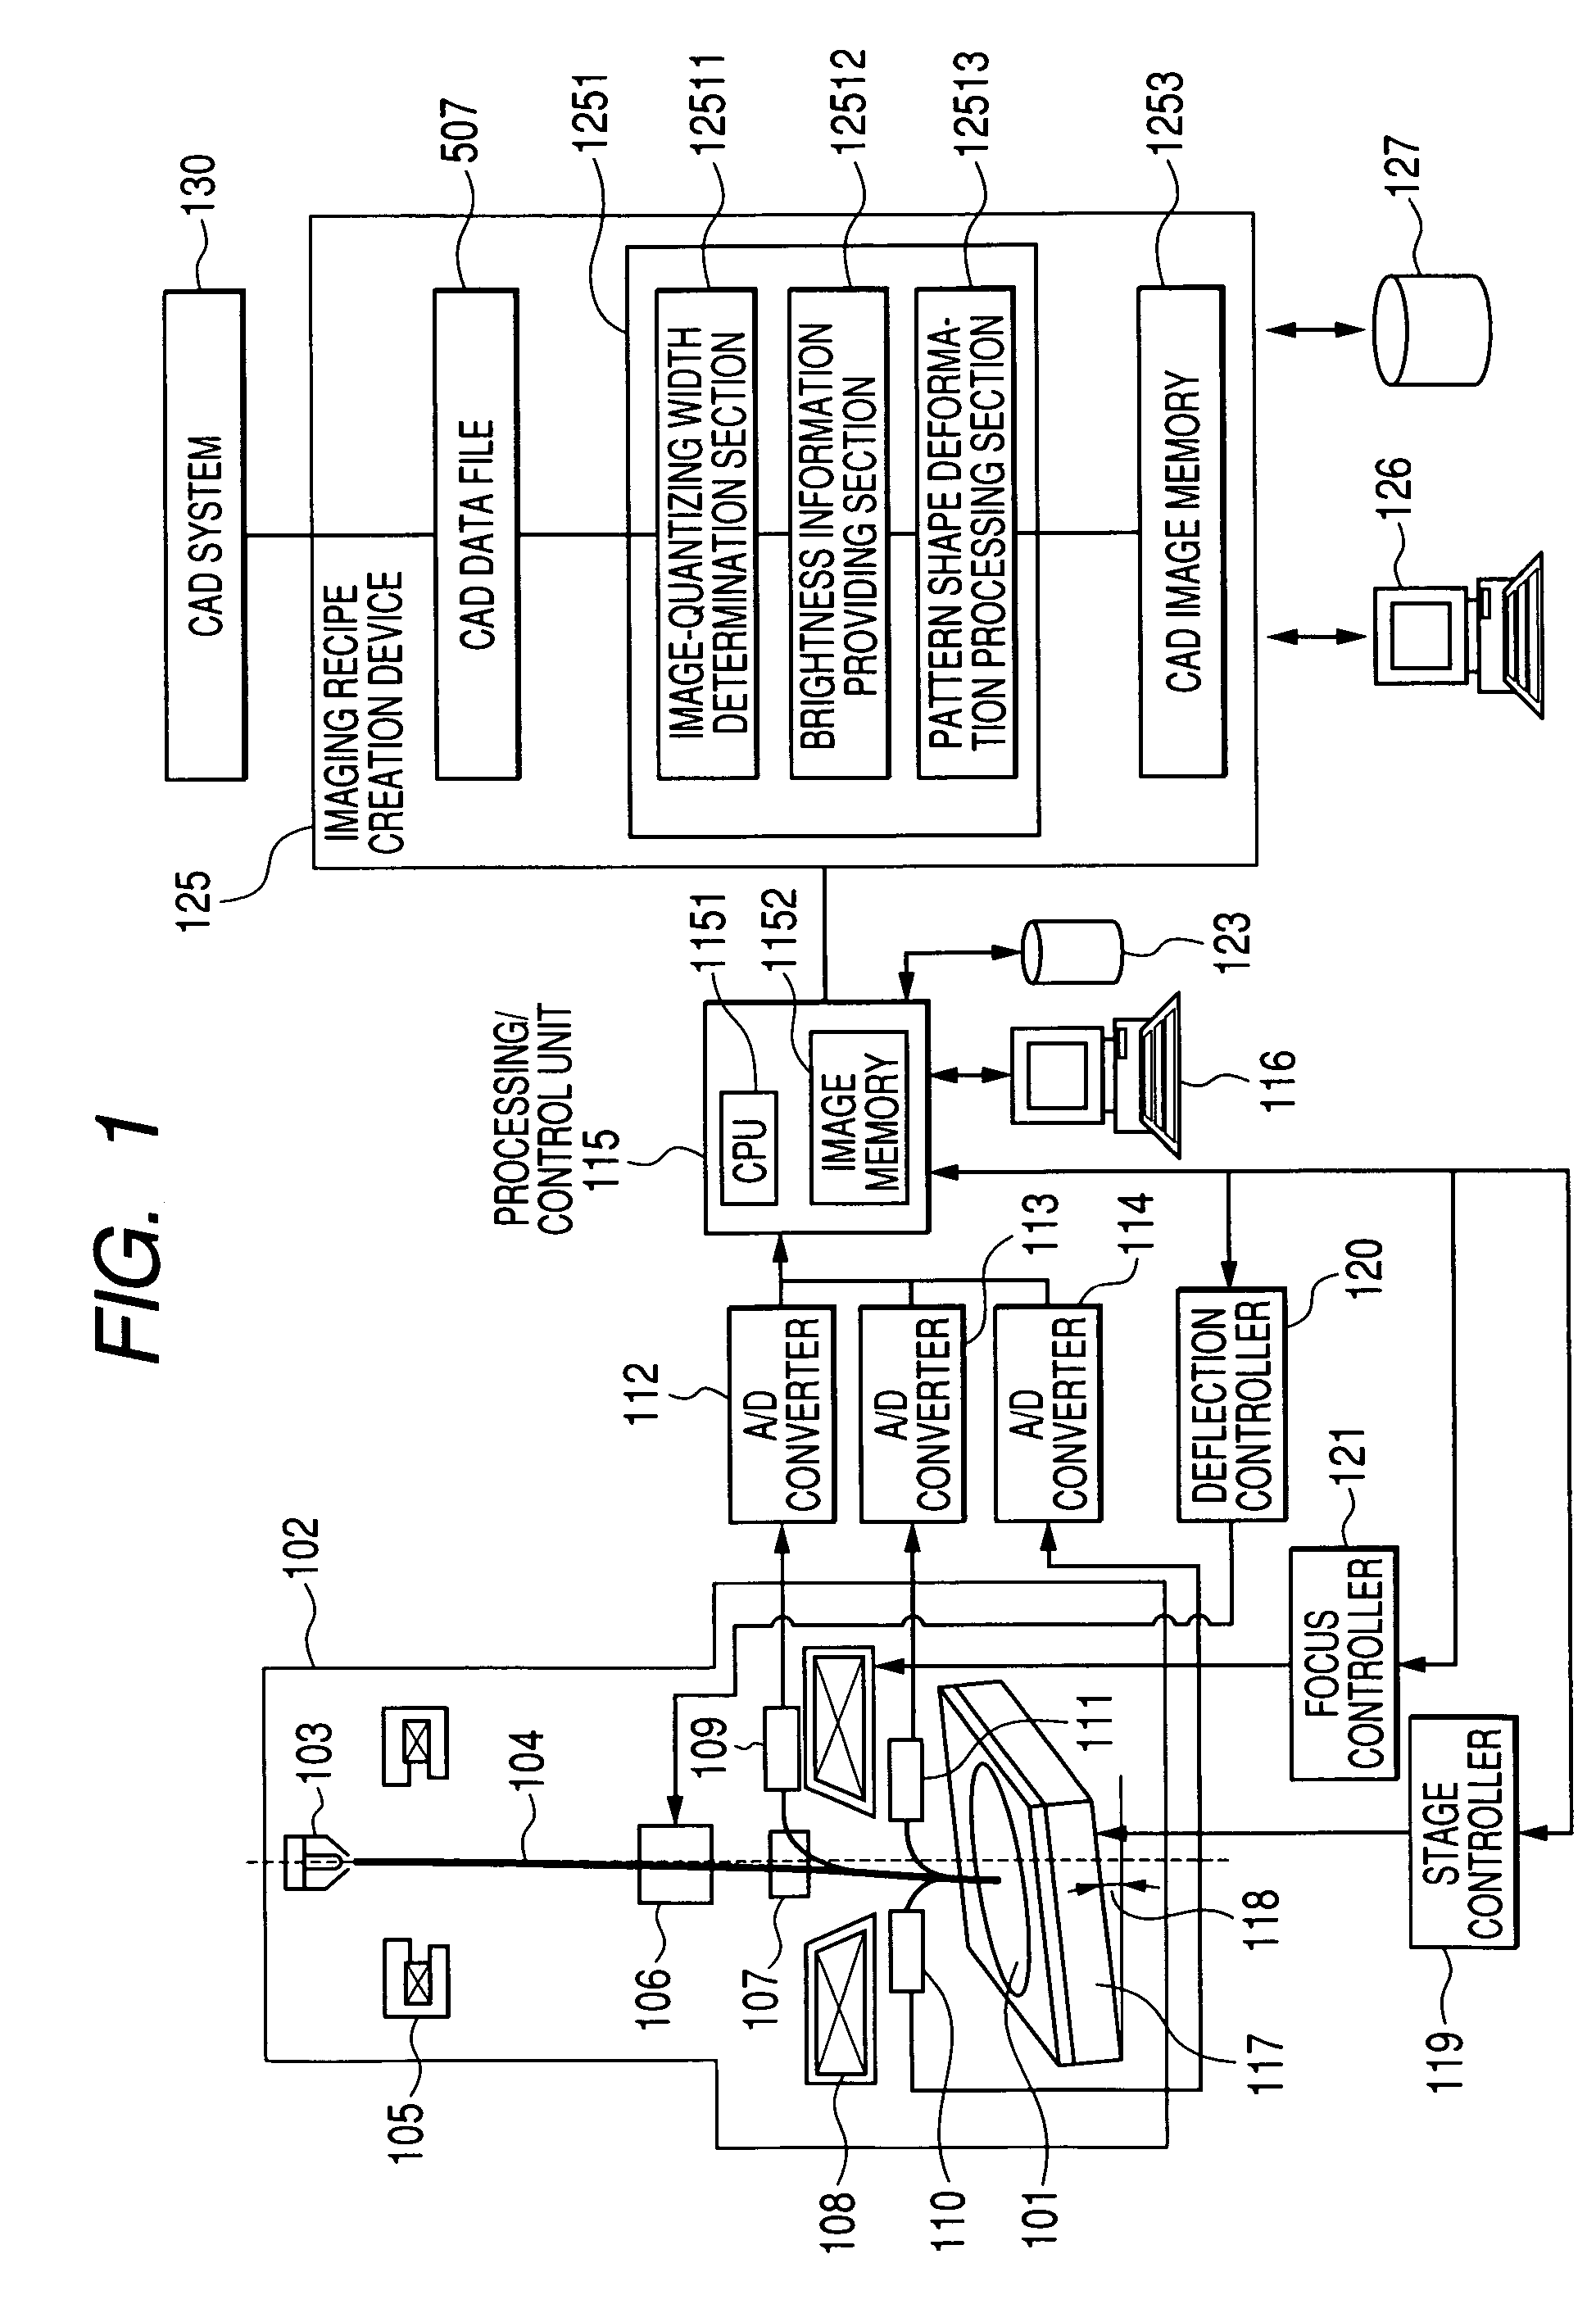 Method and apparatus for creating imaging recipe